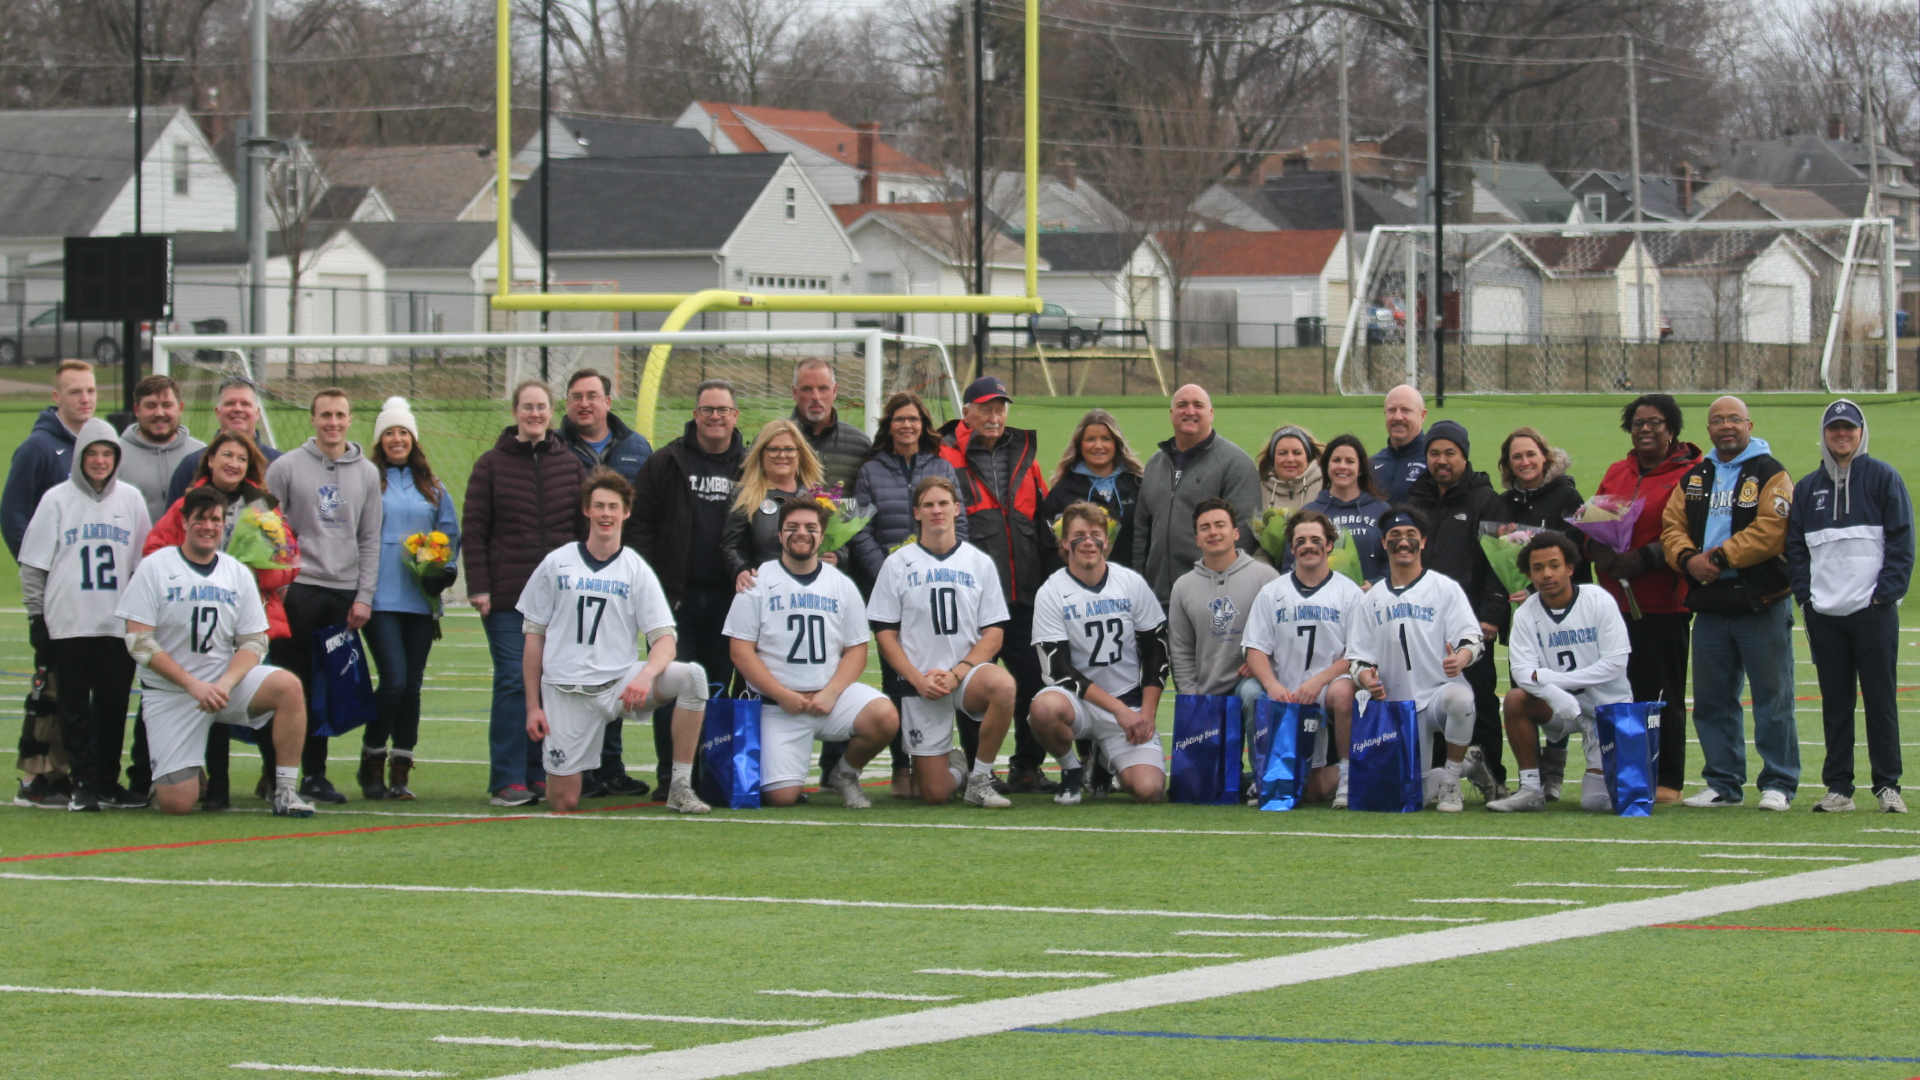 St. Ambrose gets Senior Day win over St. Mary